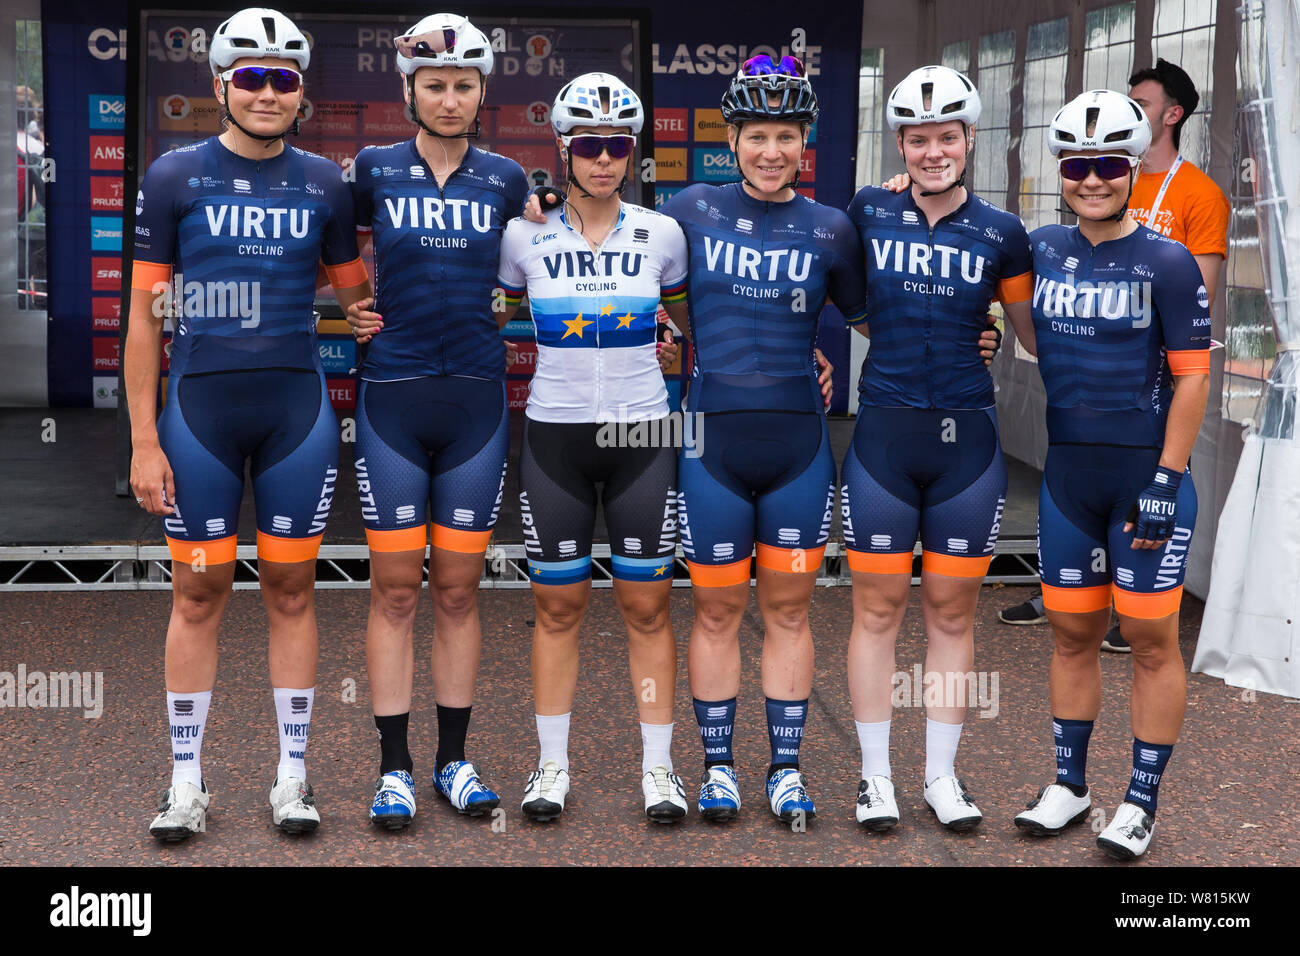 London, UK. 3 August, 2019. Team Virtu Cycling (Denmark) pose for a team photograph before the Prudential RideLondon Classique. The Classique, which i Stock Photo